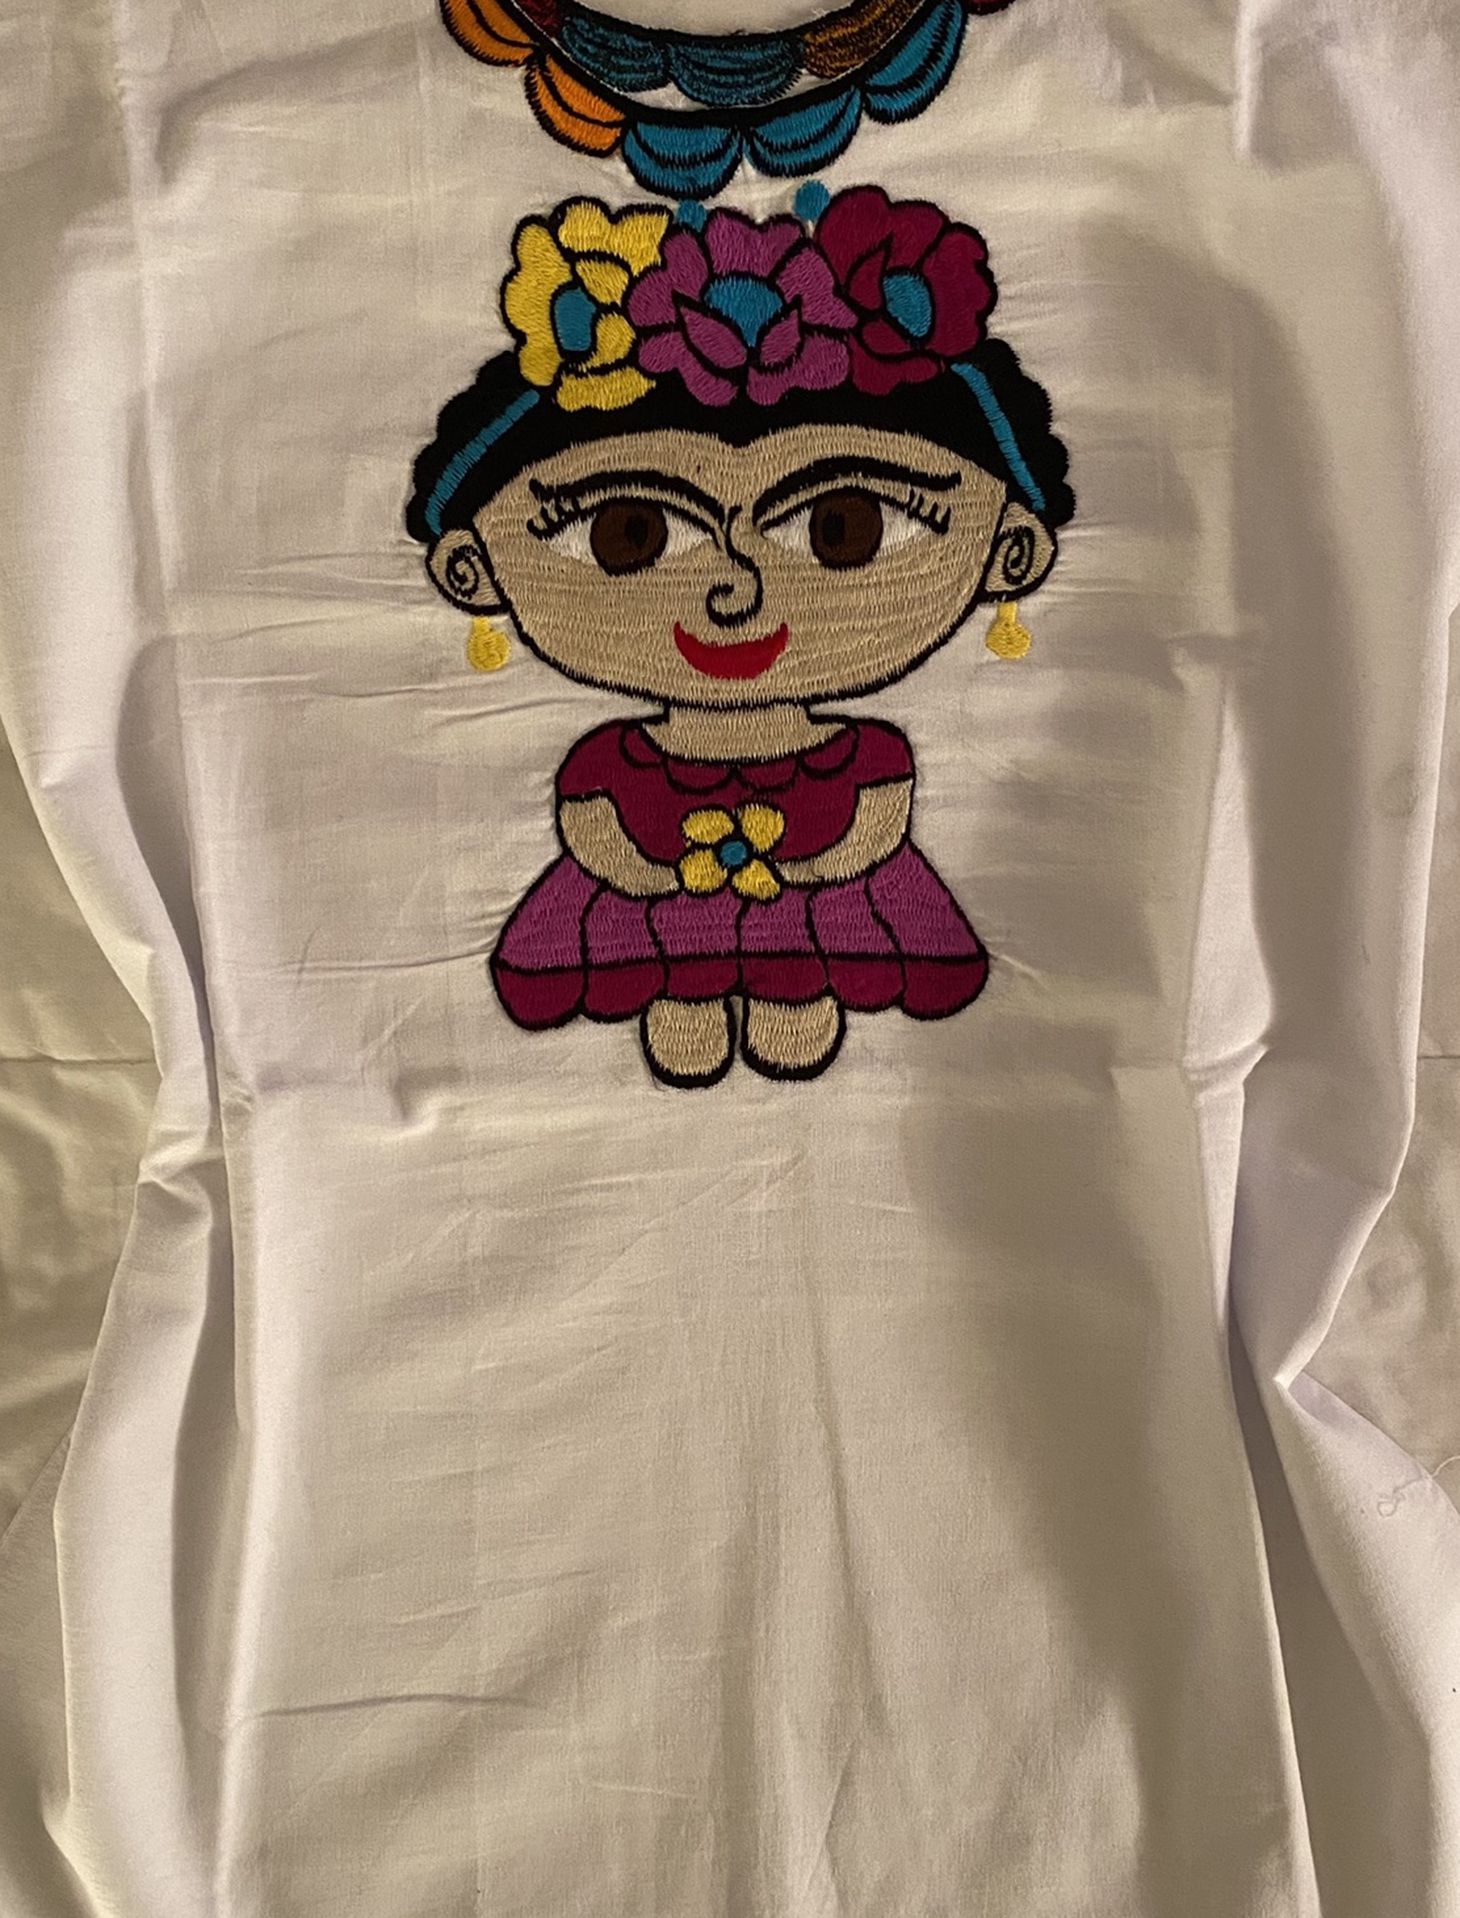 Frida Kahlo Blusa Bordada / Embroidered Style Blouse for Sale in Santee, CA -